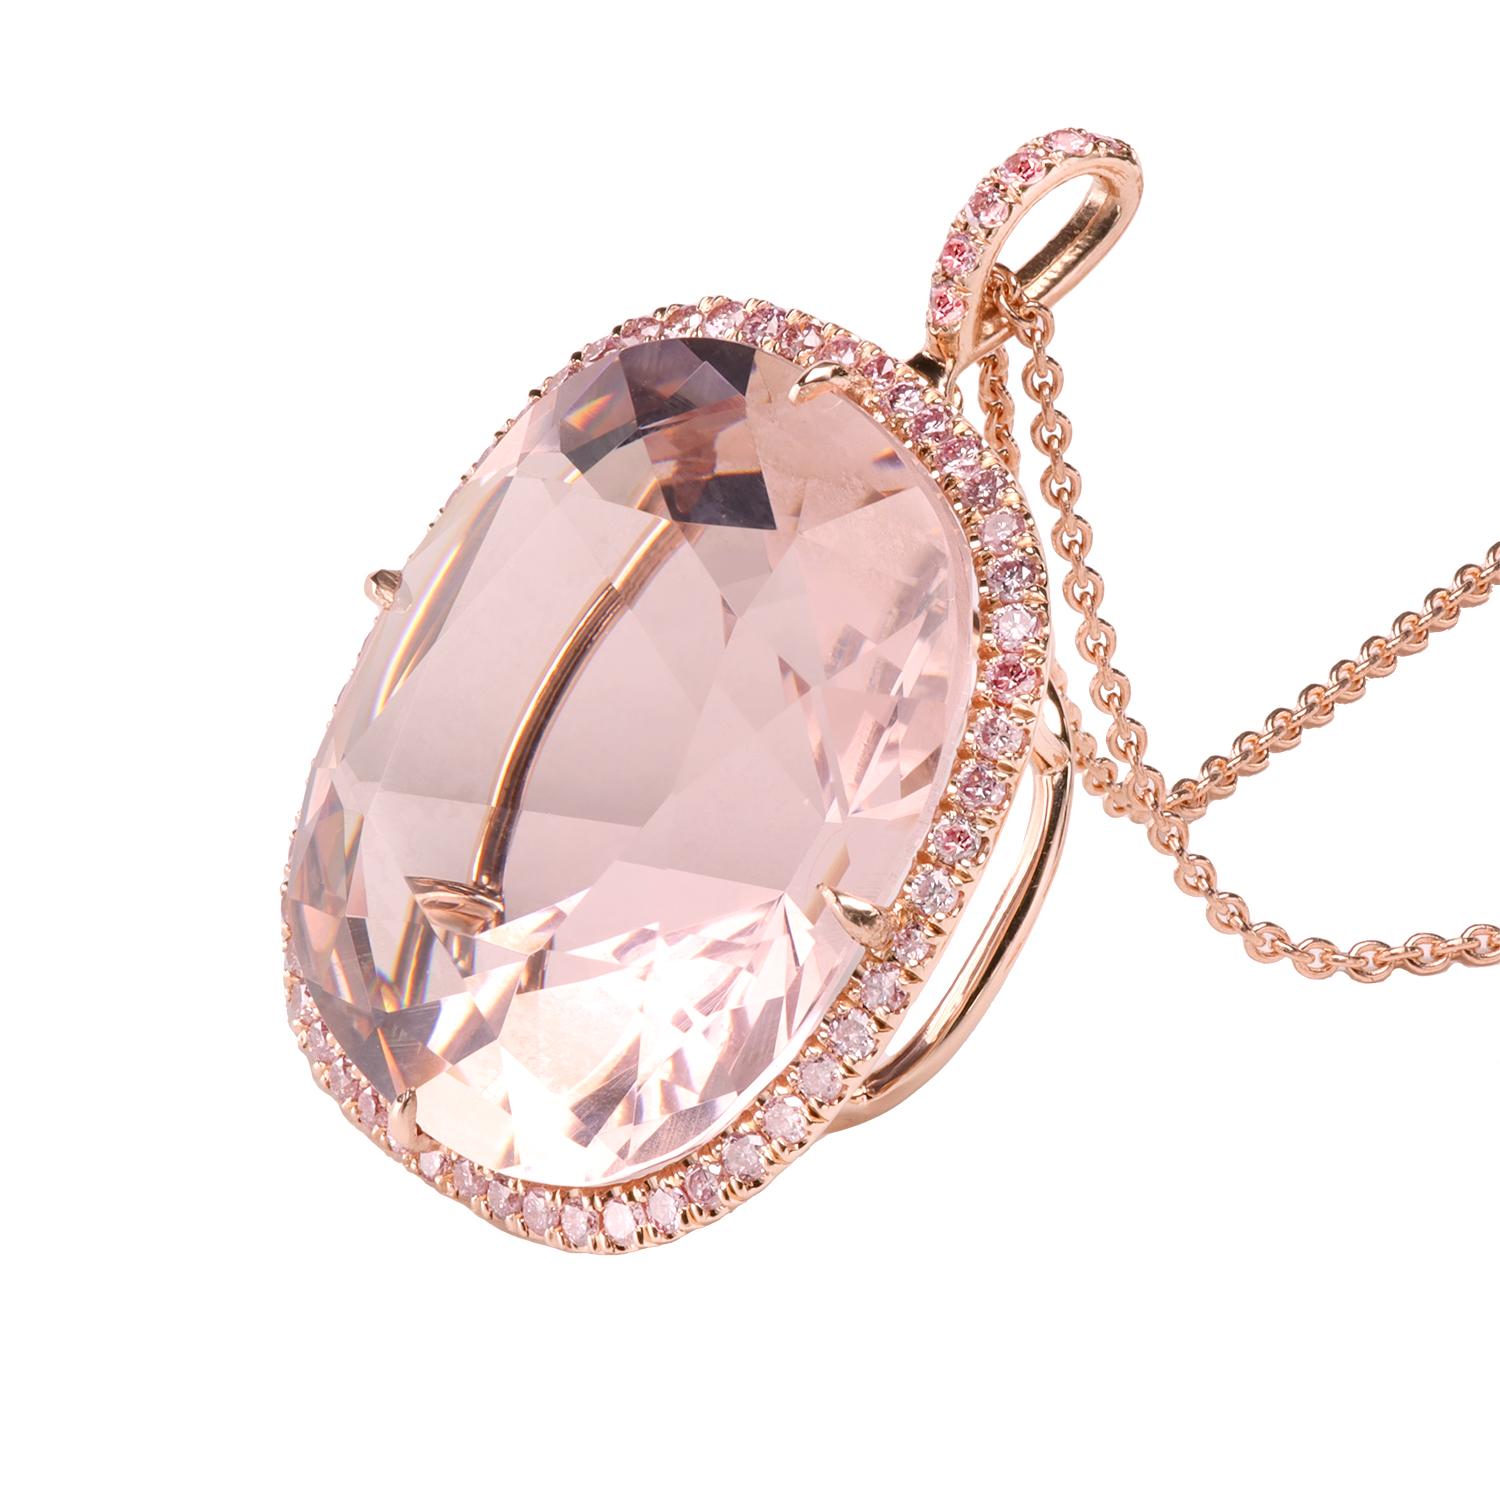 Brimming with life, this sumptuous pendant exudes glamor and sparkle thanks to bespoke magic by Maestro of Brilliance: Leon Mege. An elegant rose gold pendant with the stunning vintage cut 15.59-carat natural morganite is mounted in a prong setting